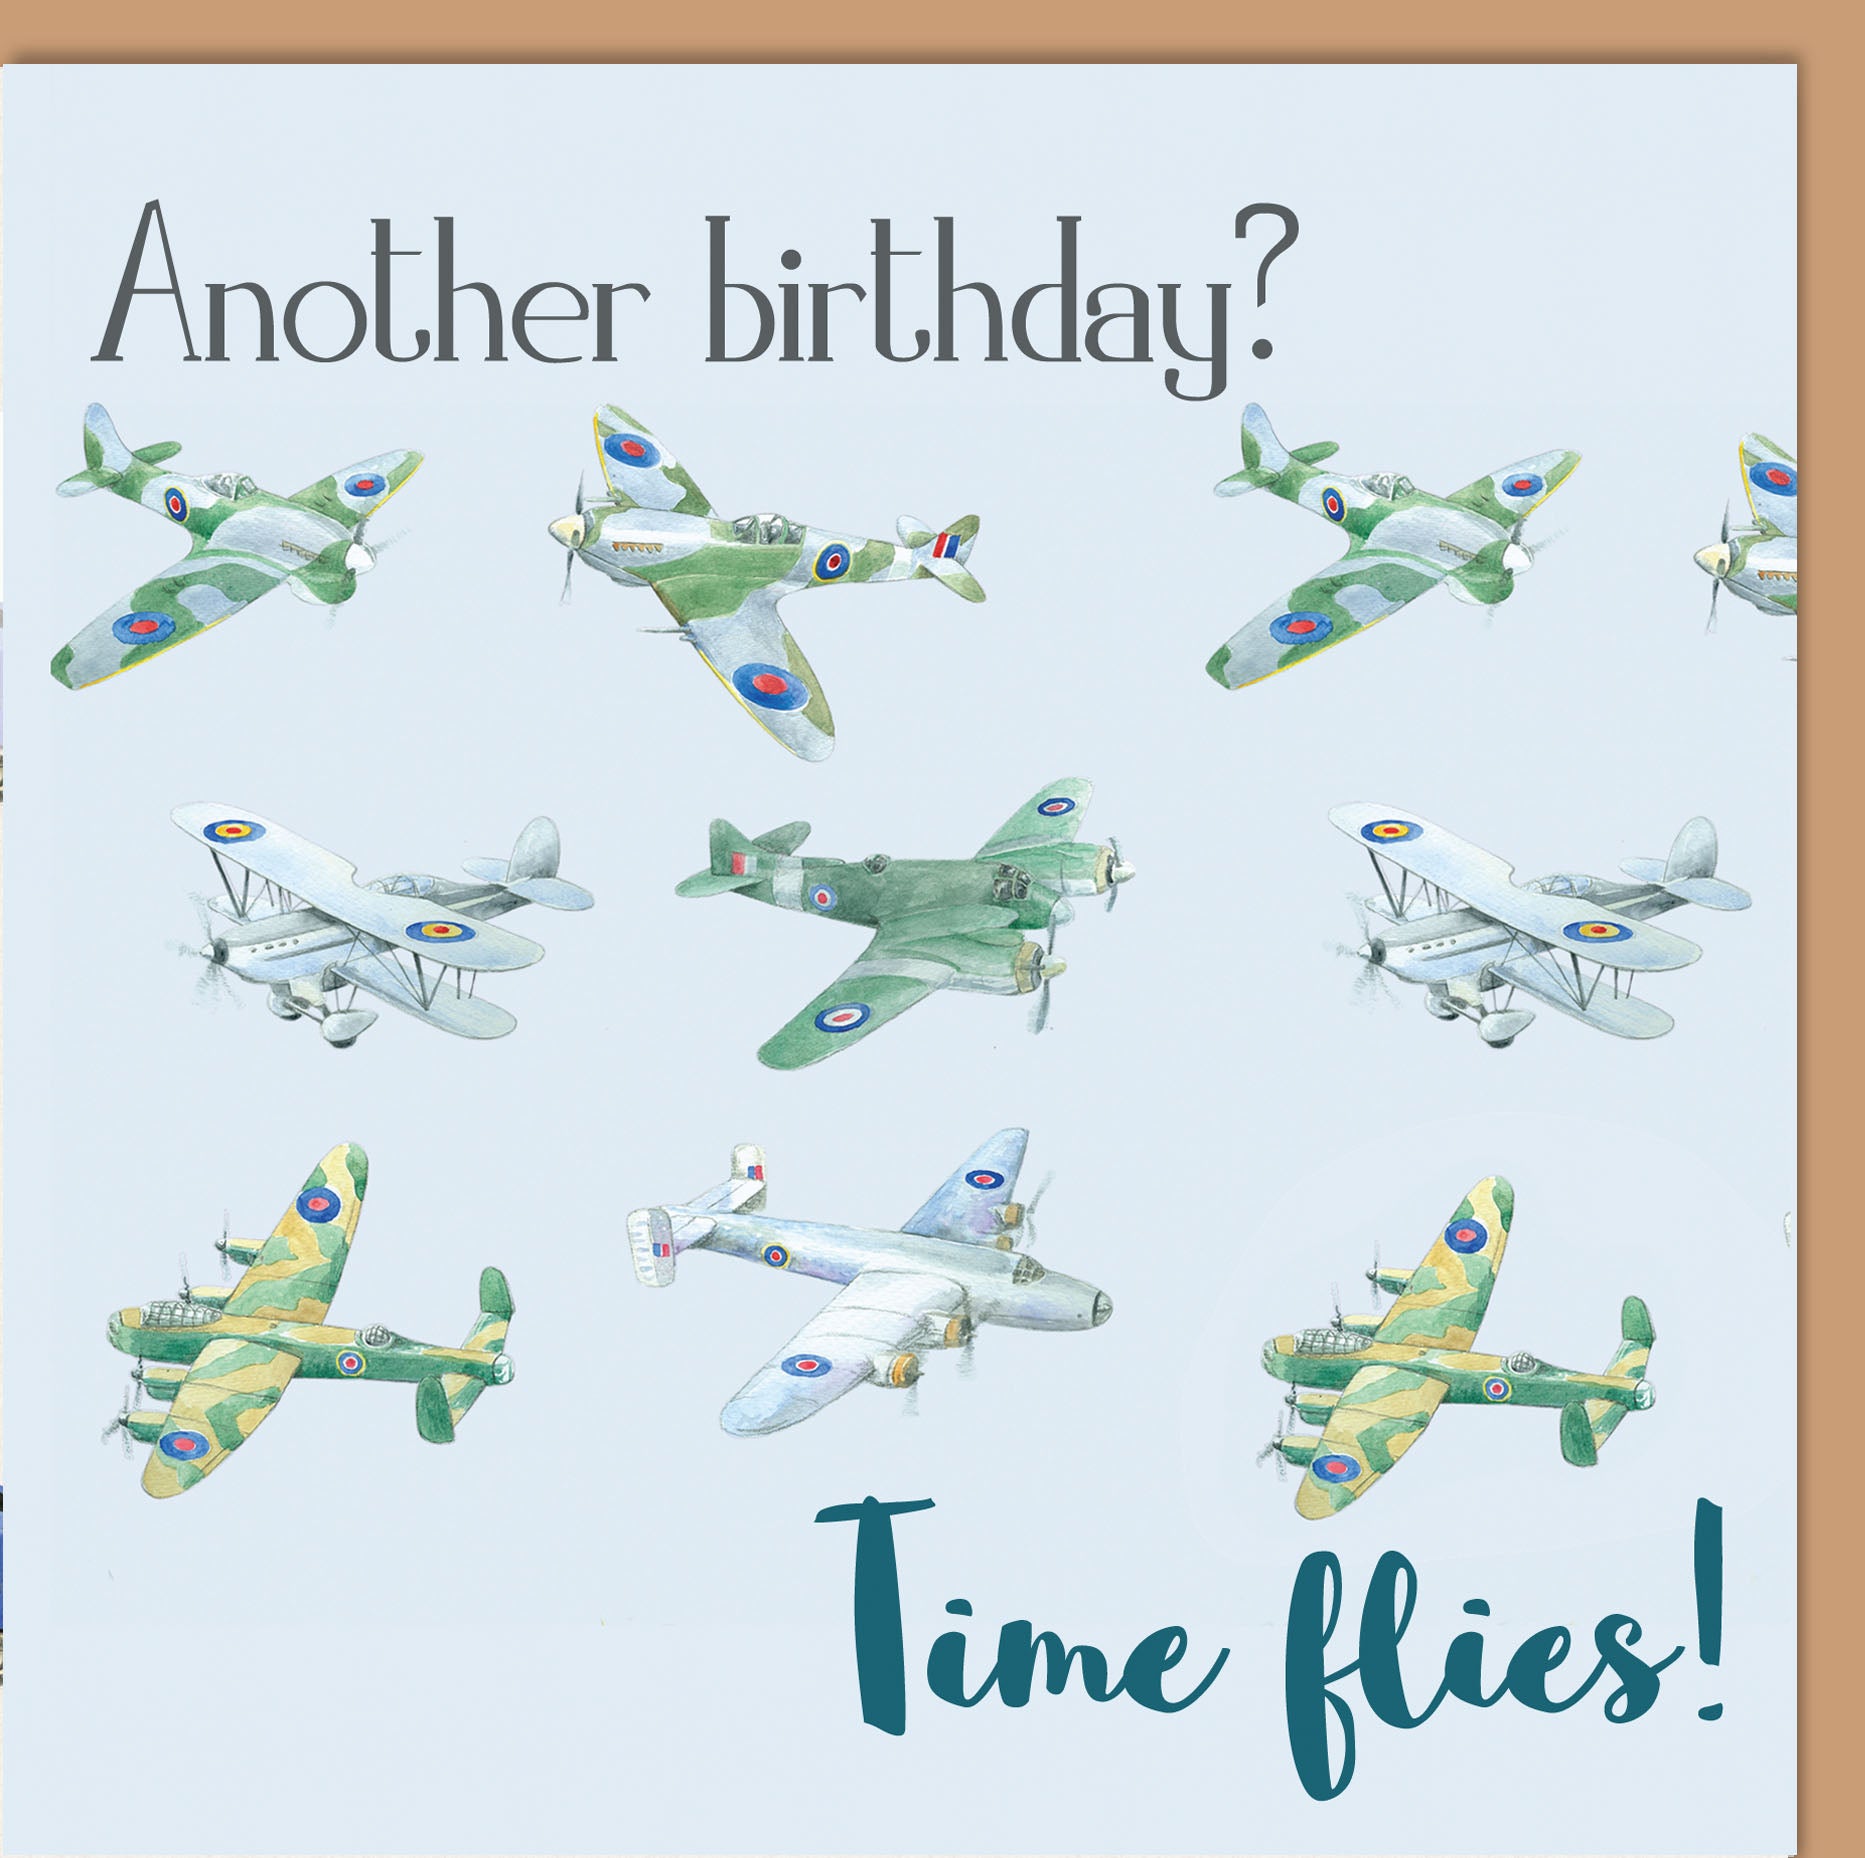 Classic British war Bomber planes birthday card by Ceinwen Campbell and the The Arty penguin 